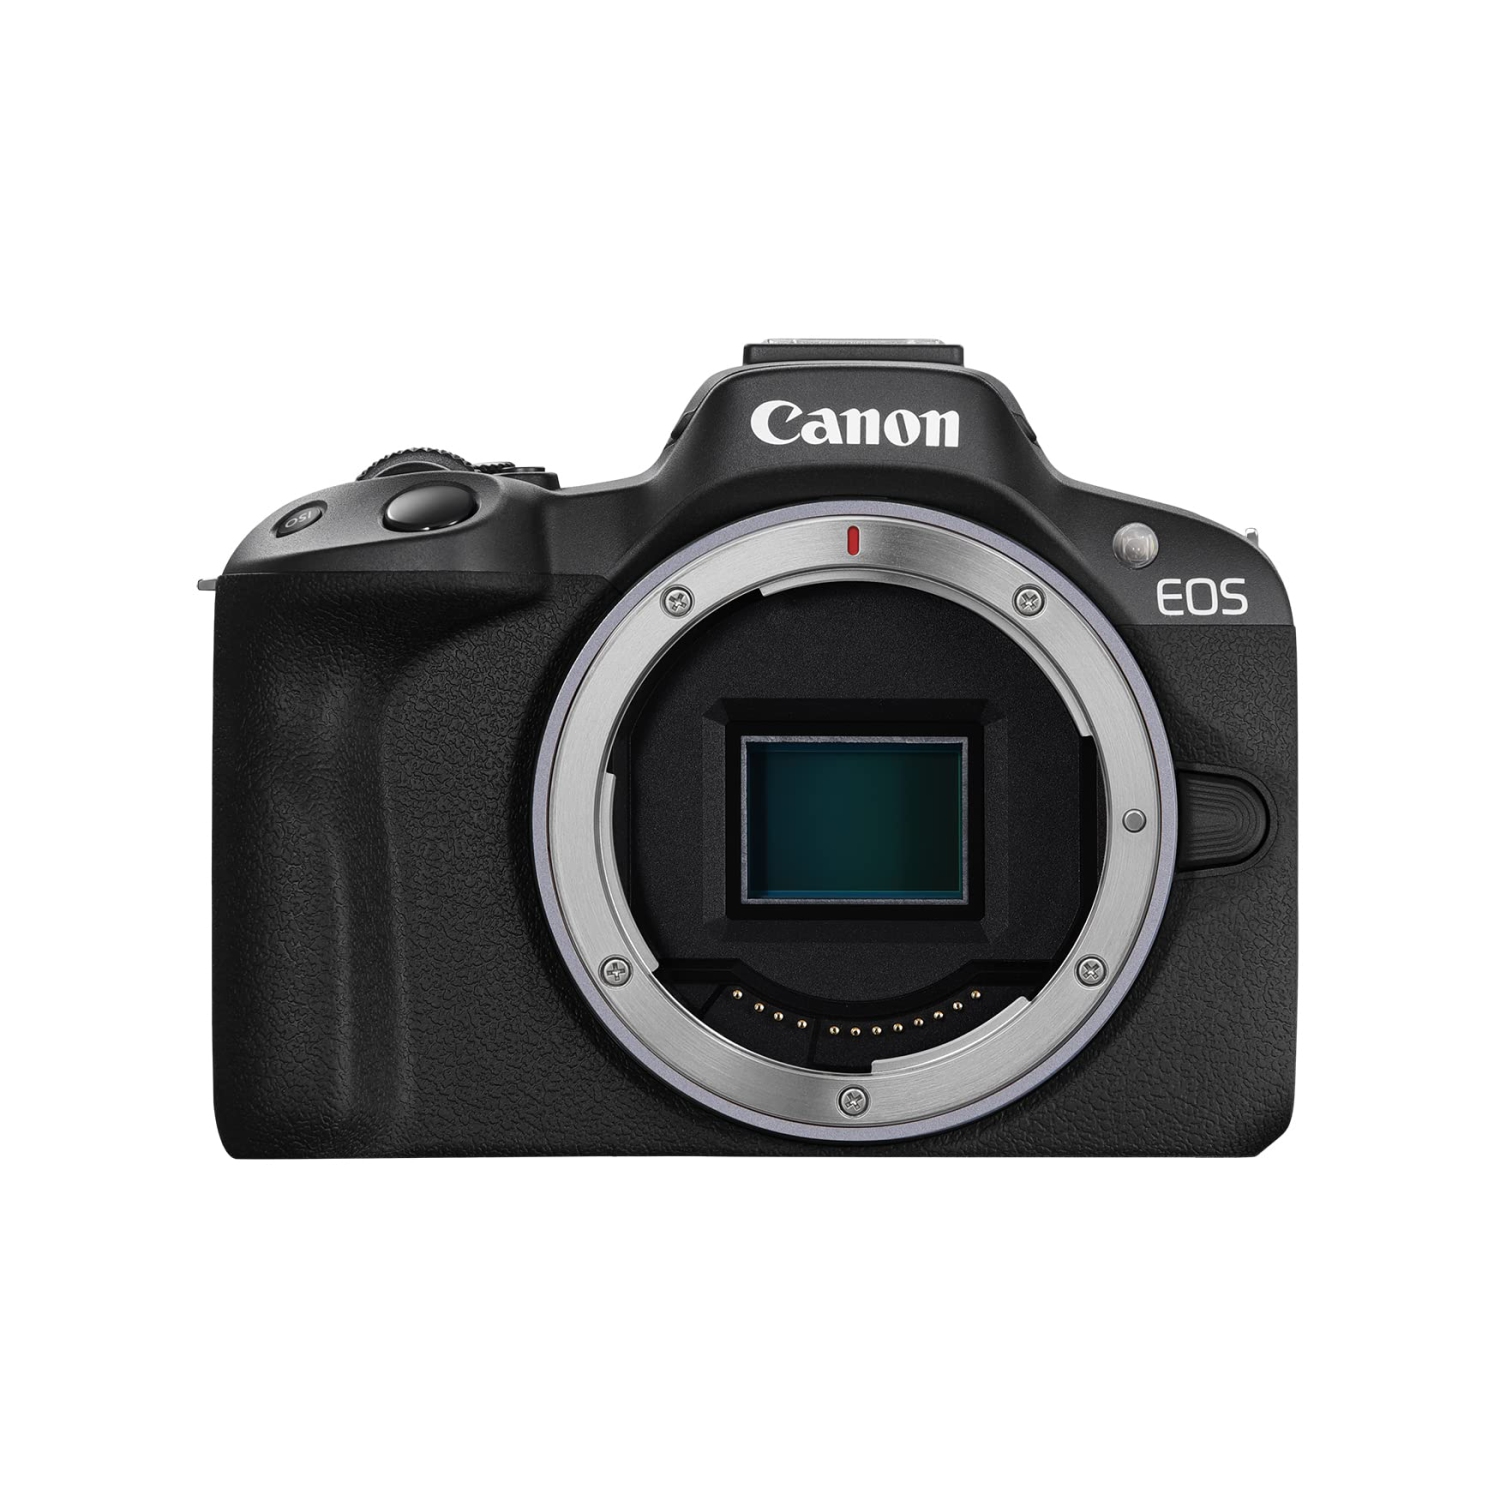 Canon EOS R50 Mirrorless Vlogging Camera (Body Only/Black), RF Mount, 24.2 MP, 4K Video, DIGIC X Image Processor, Subject Detection & Tracking, Compact, Smartphone Connection, Cont